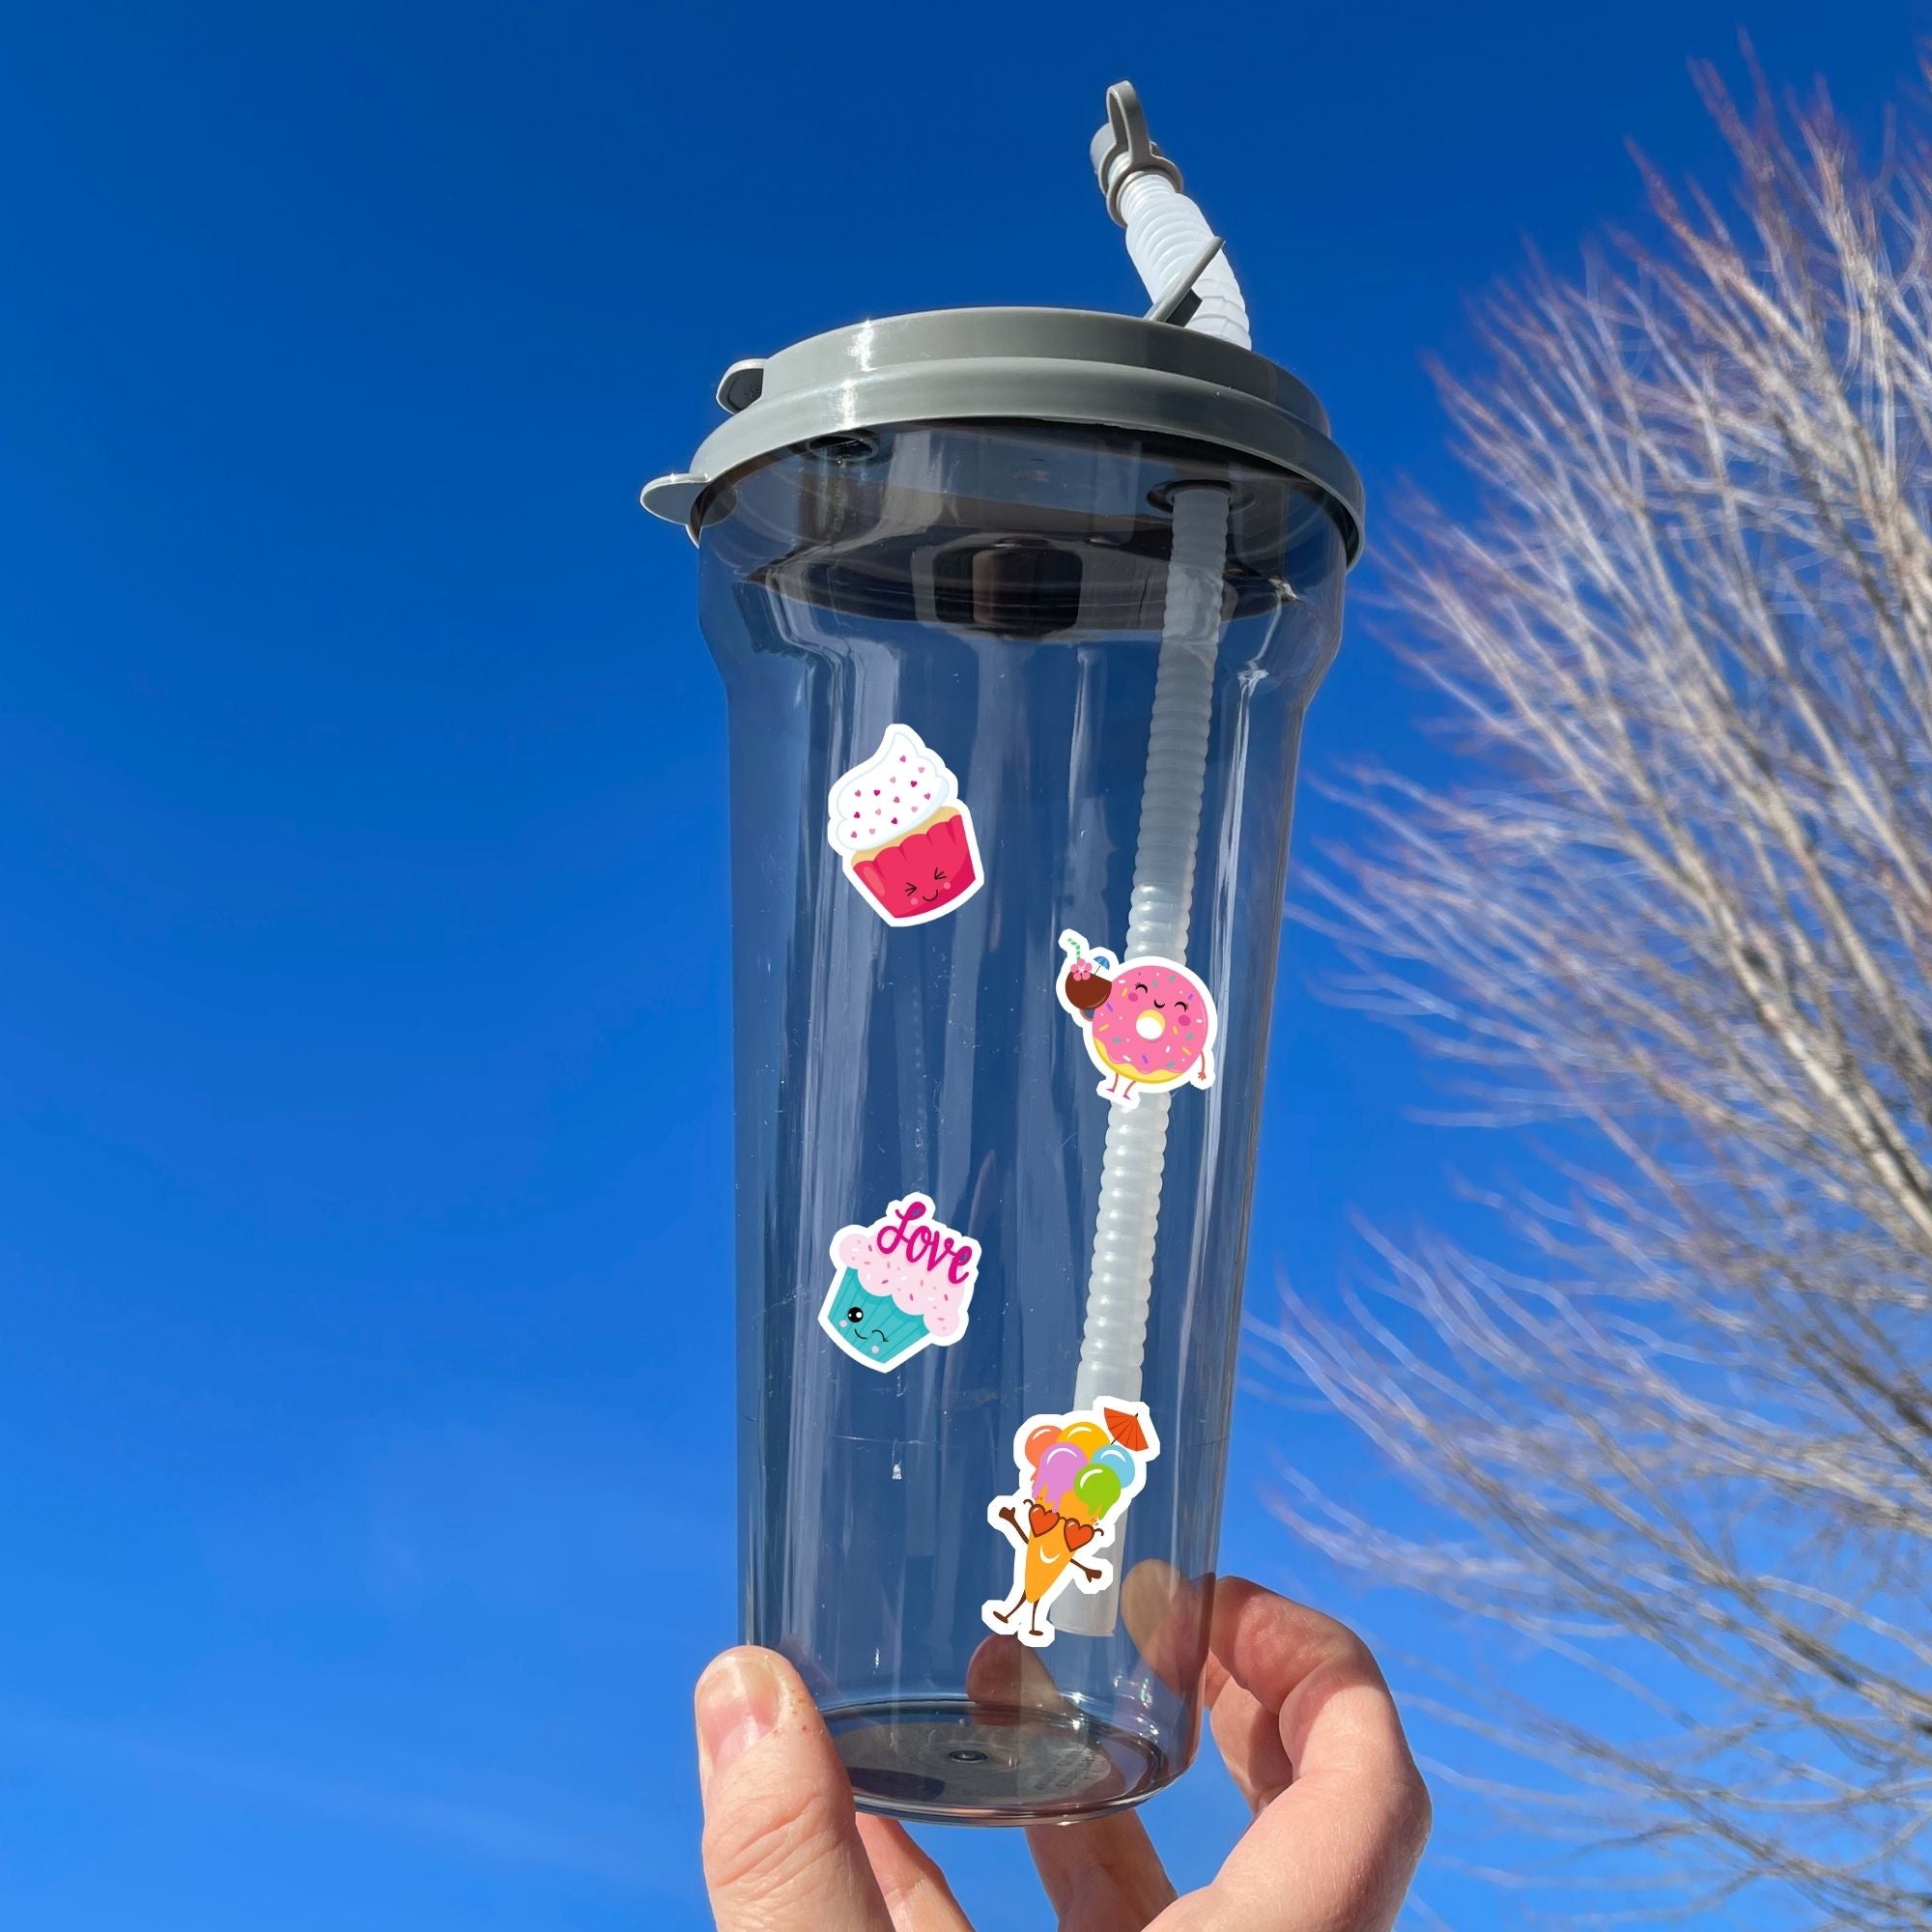 This image shows a water bottle with some of the Sweet Fun! stickers applied.